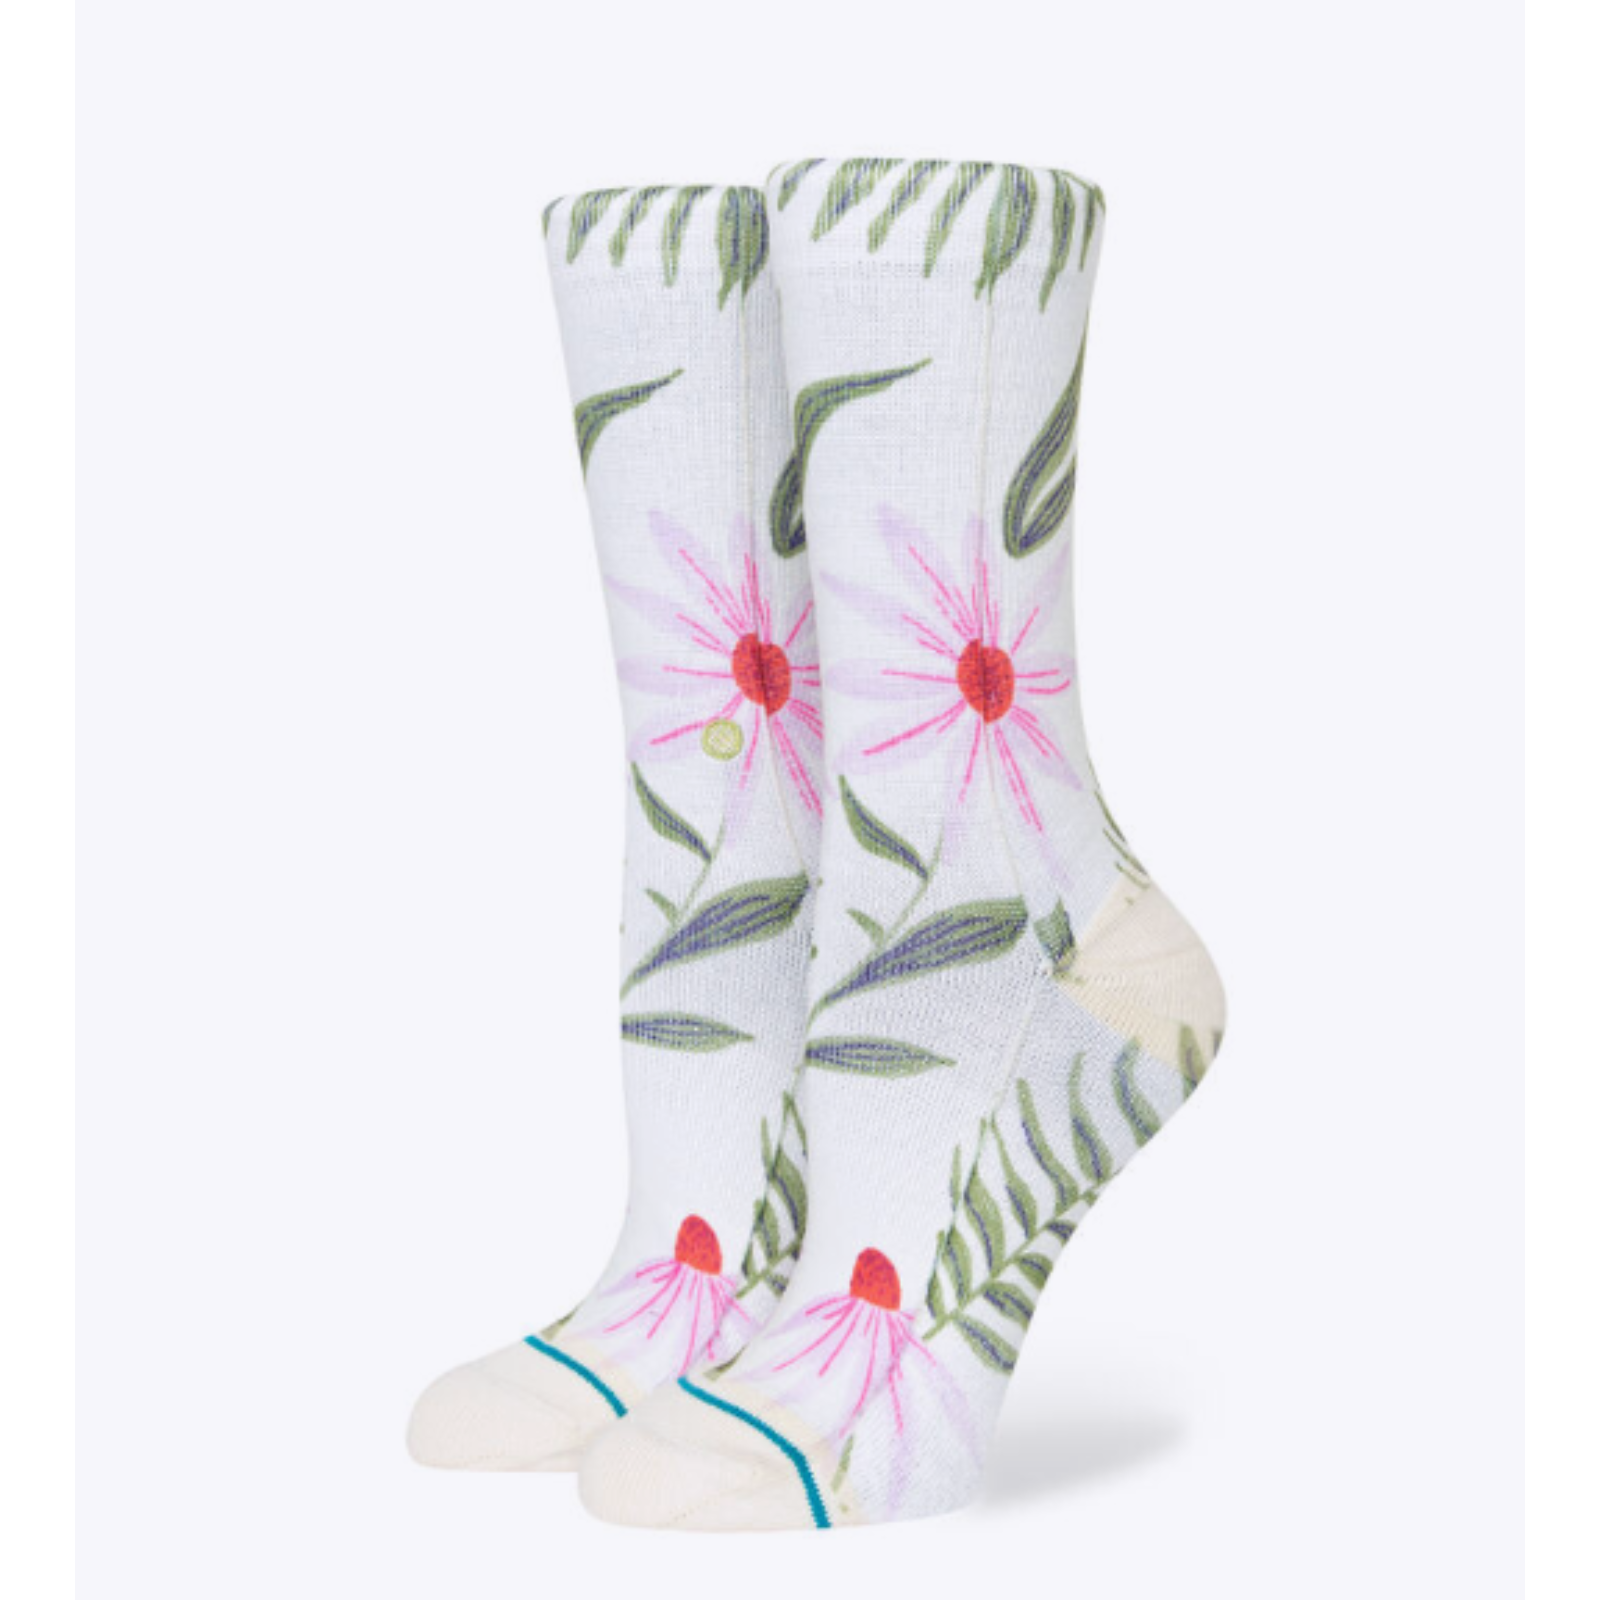 Stance Flaunt women's crew sock featuring white sock with pink flowers and green leaves and stems. Socks shown on display feet. 